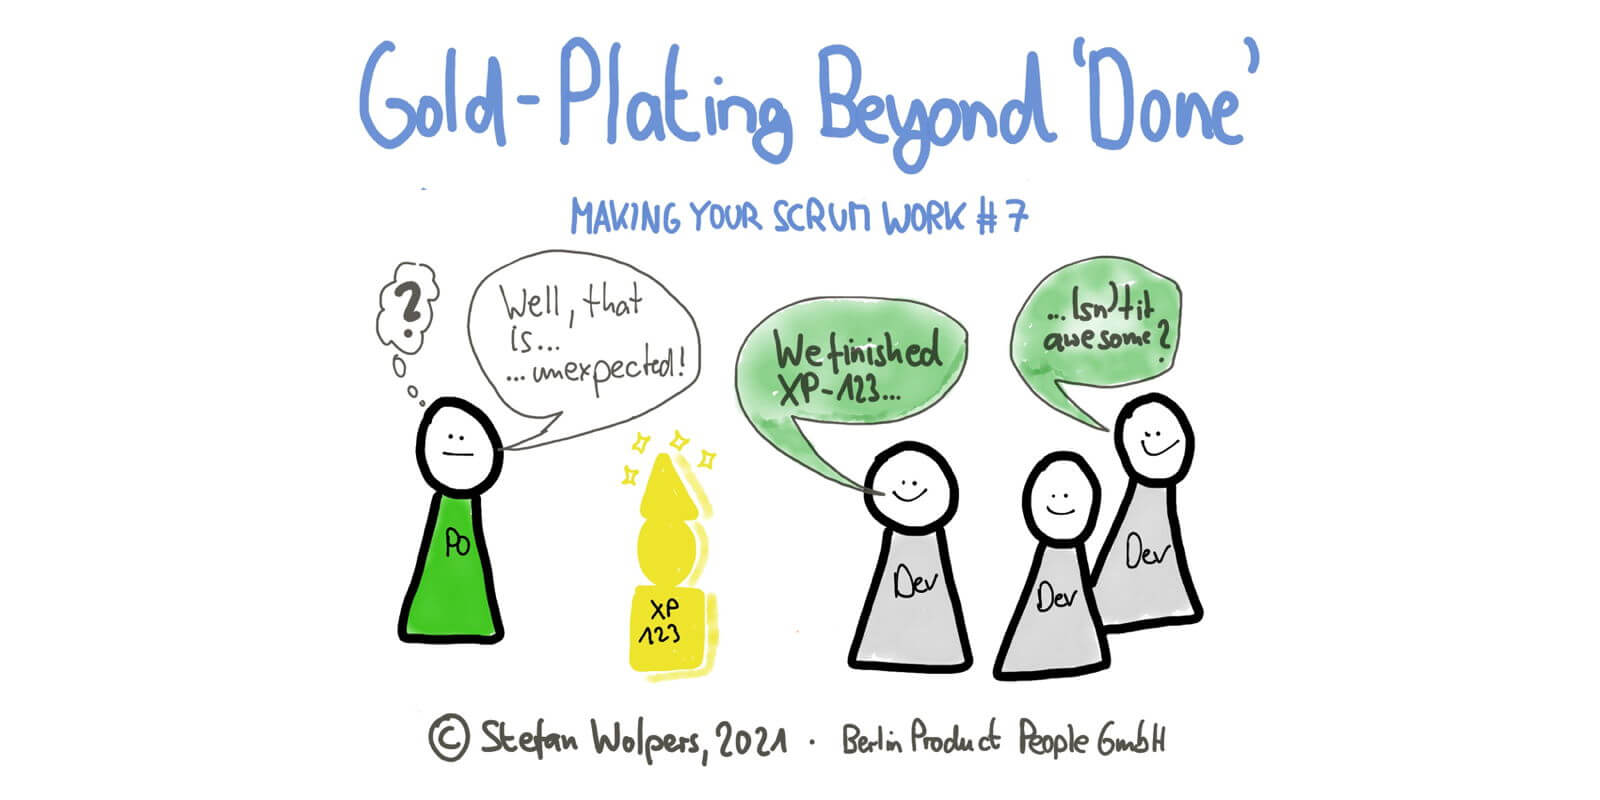 Gold Plating Beyond Done: Developer Anti-Patterns — Making Your Scrum Work - Berlin Product People GmbH